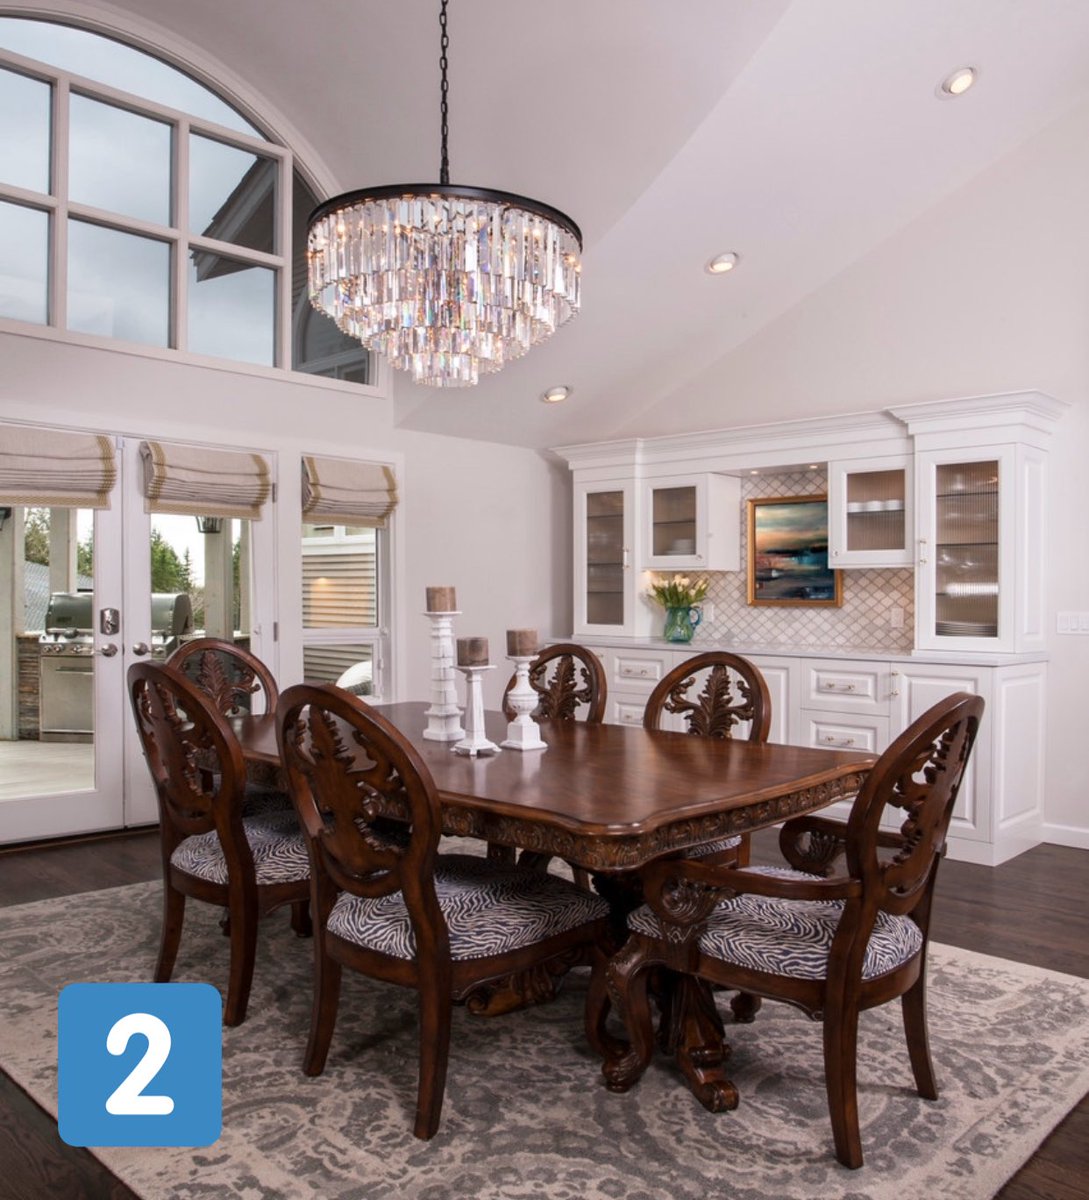 What’s your style dining room?1. Contemporary2. Traditional3. Industrial4. Transitional